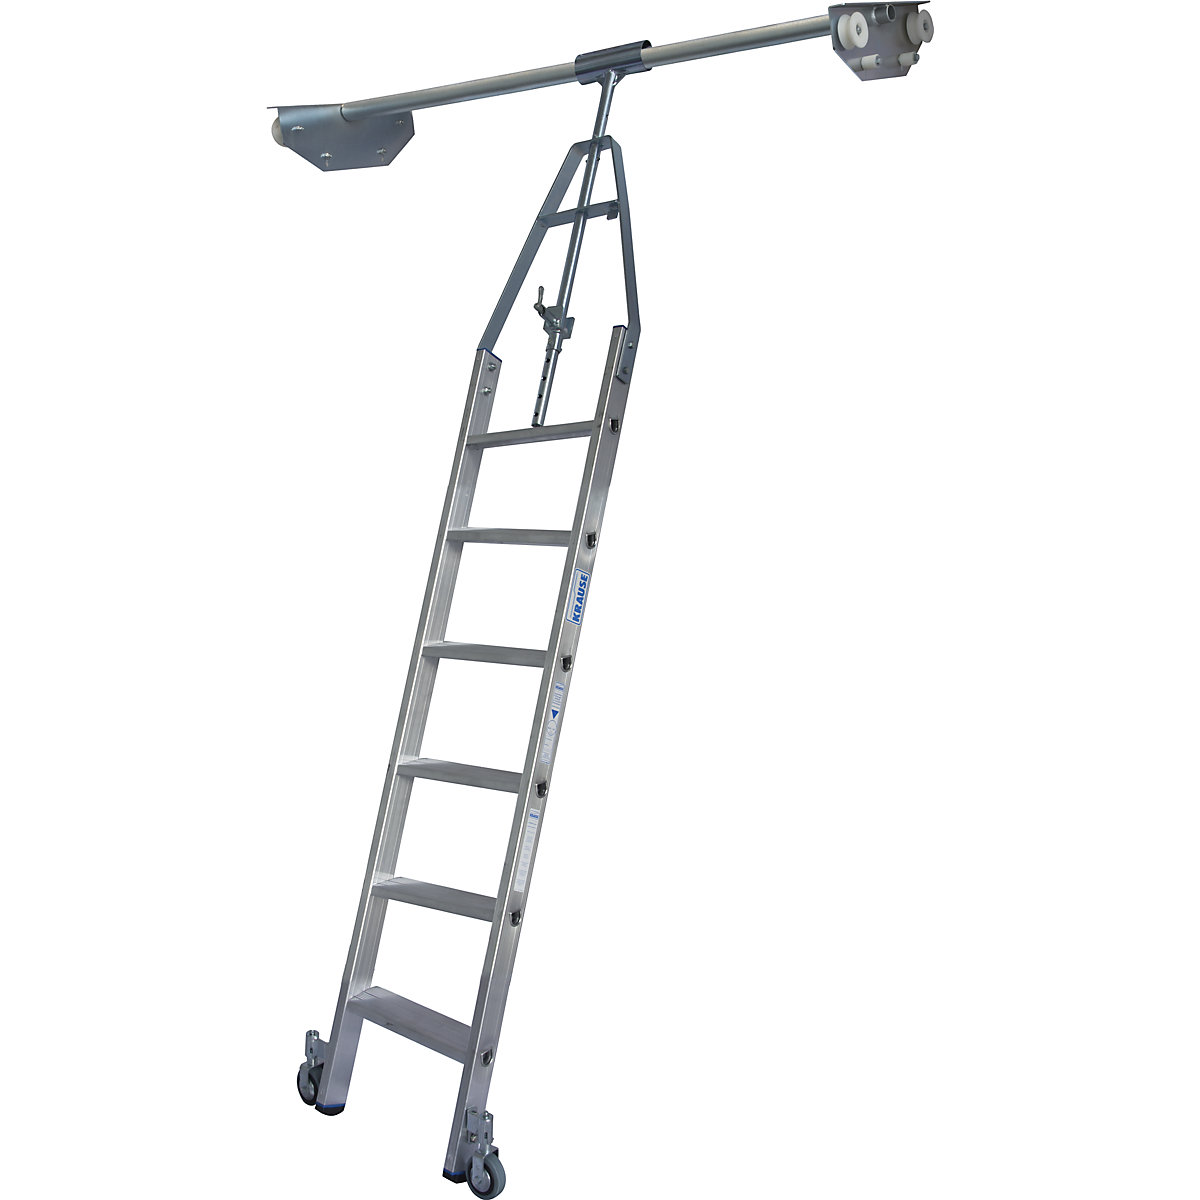 Step shelf ladder – KRAUSE, double sided shelf unit with wheel unit on top for round tubing rail system, 6 steps-6